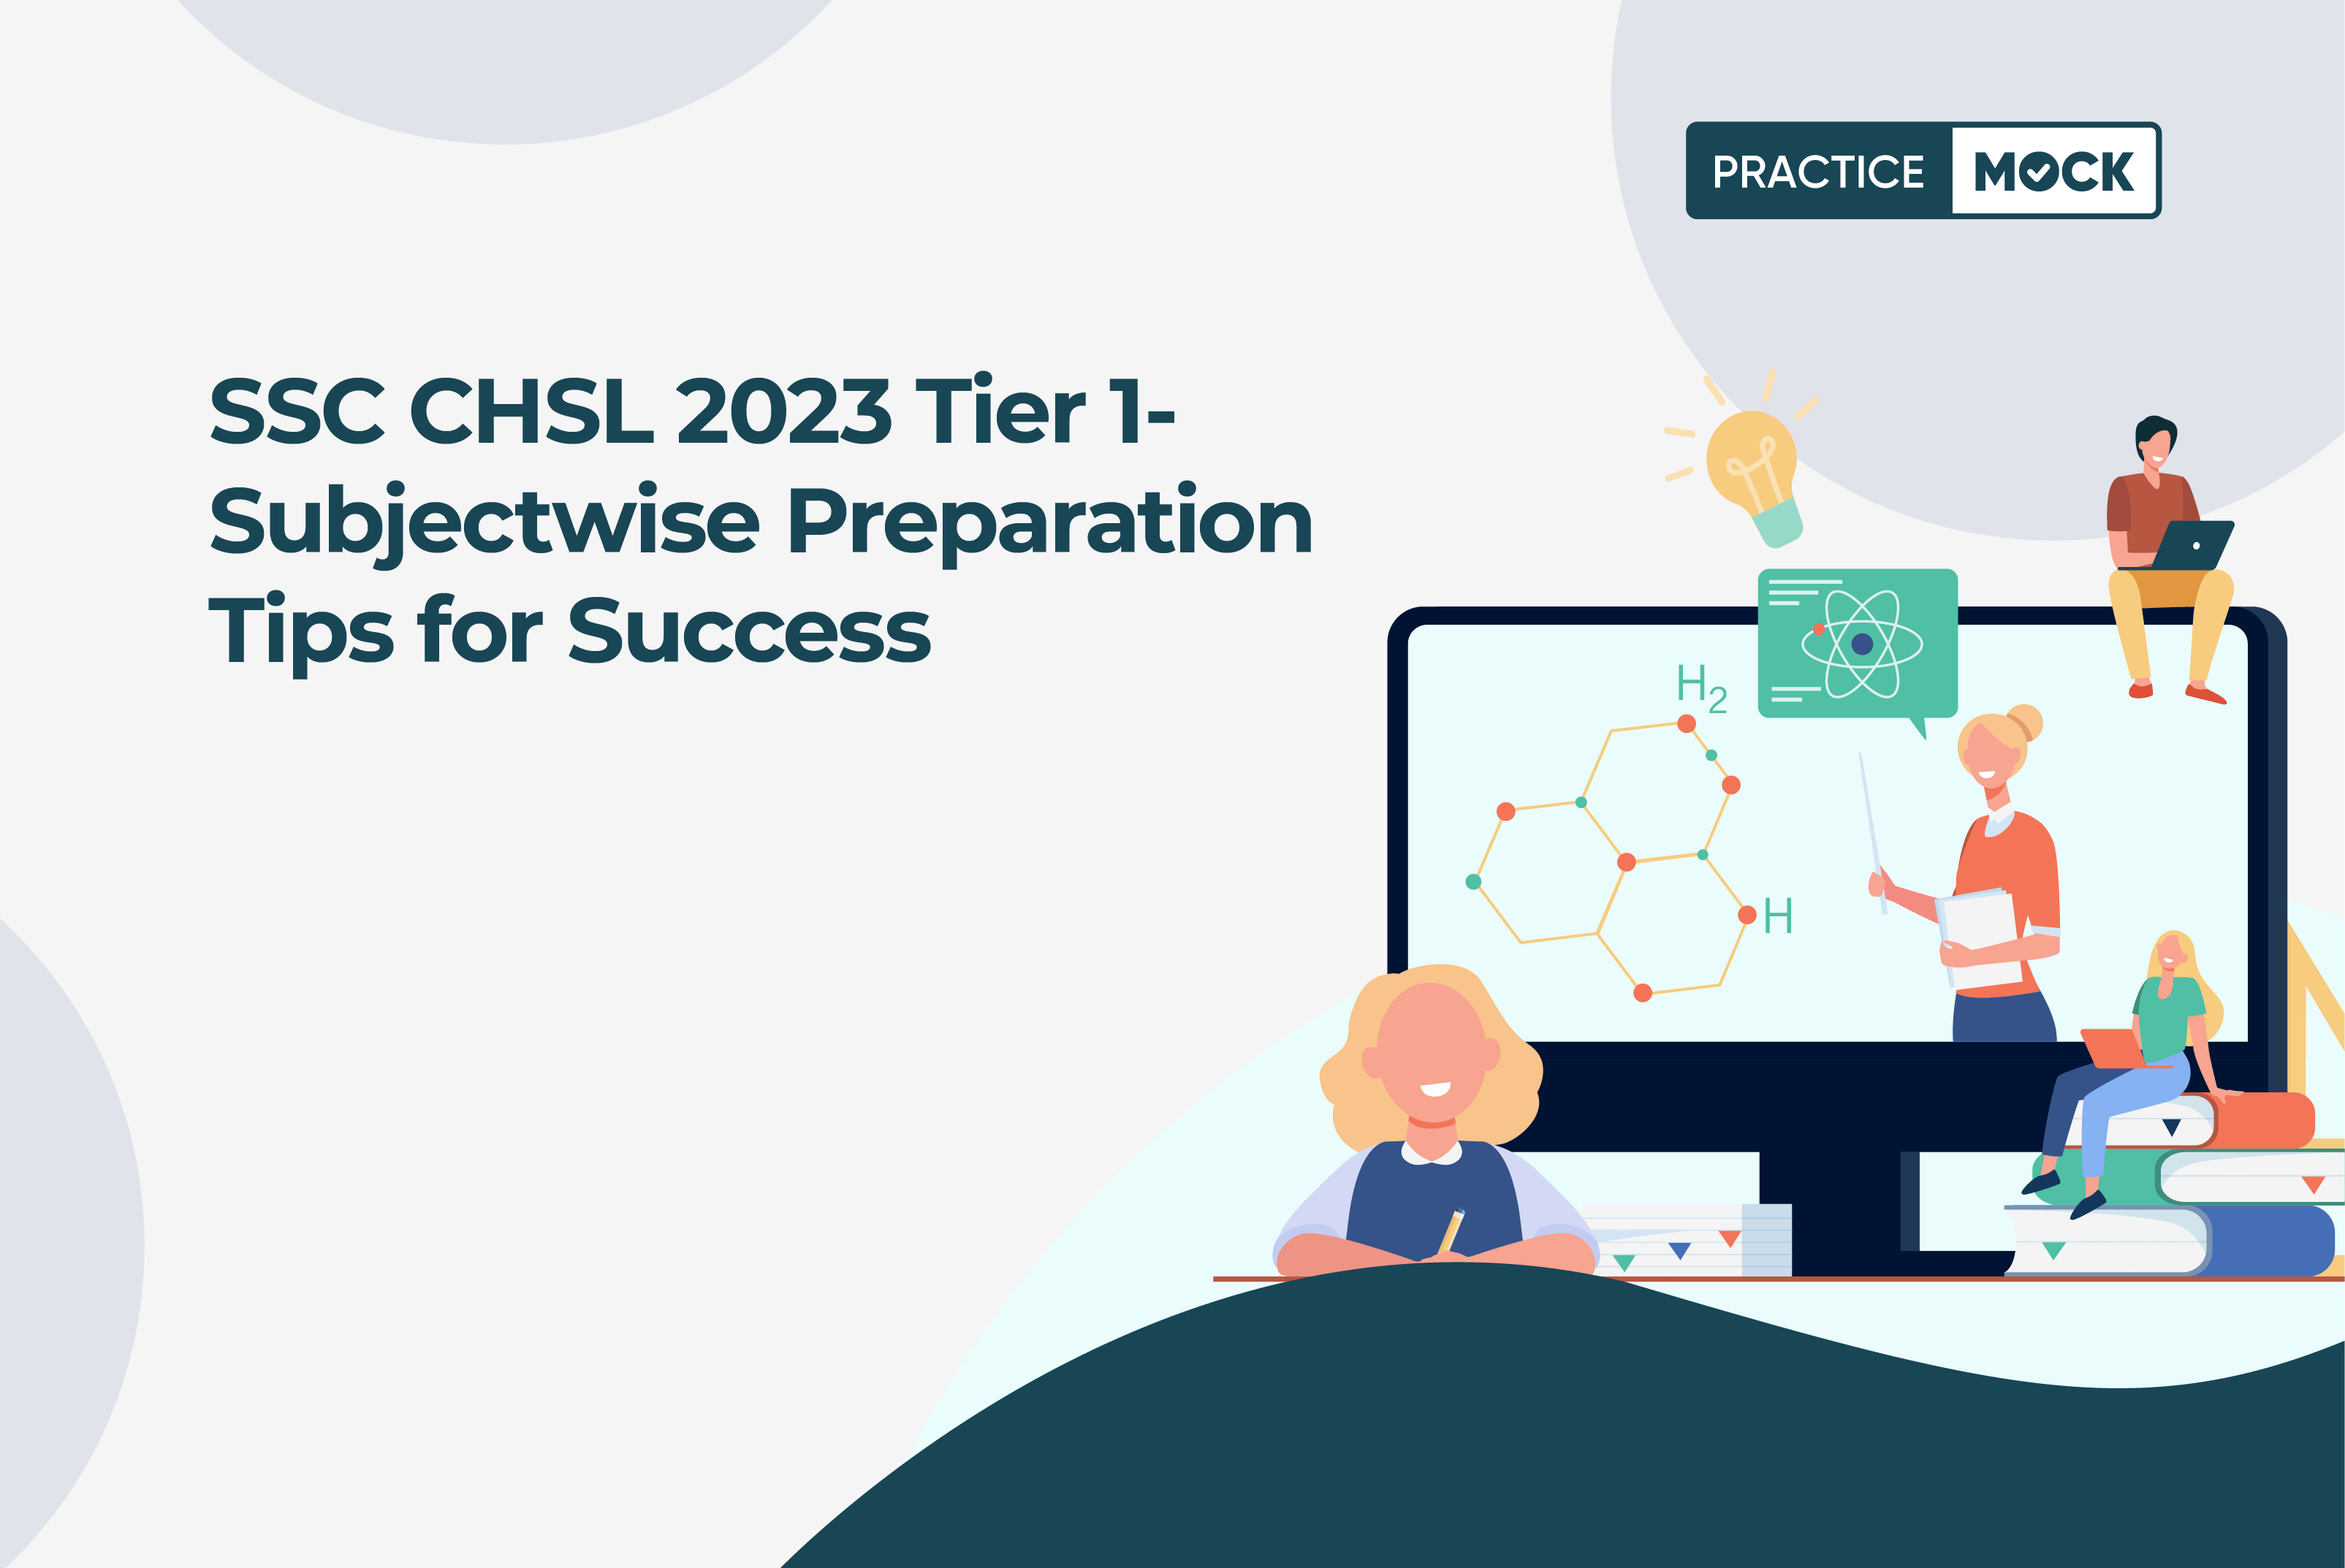 SSC CHSL 2023 Tier 1-How to Prepare all the Subjects in Just 25 Days?